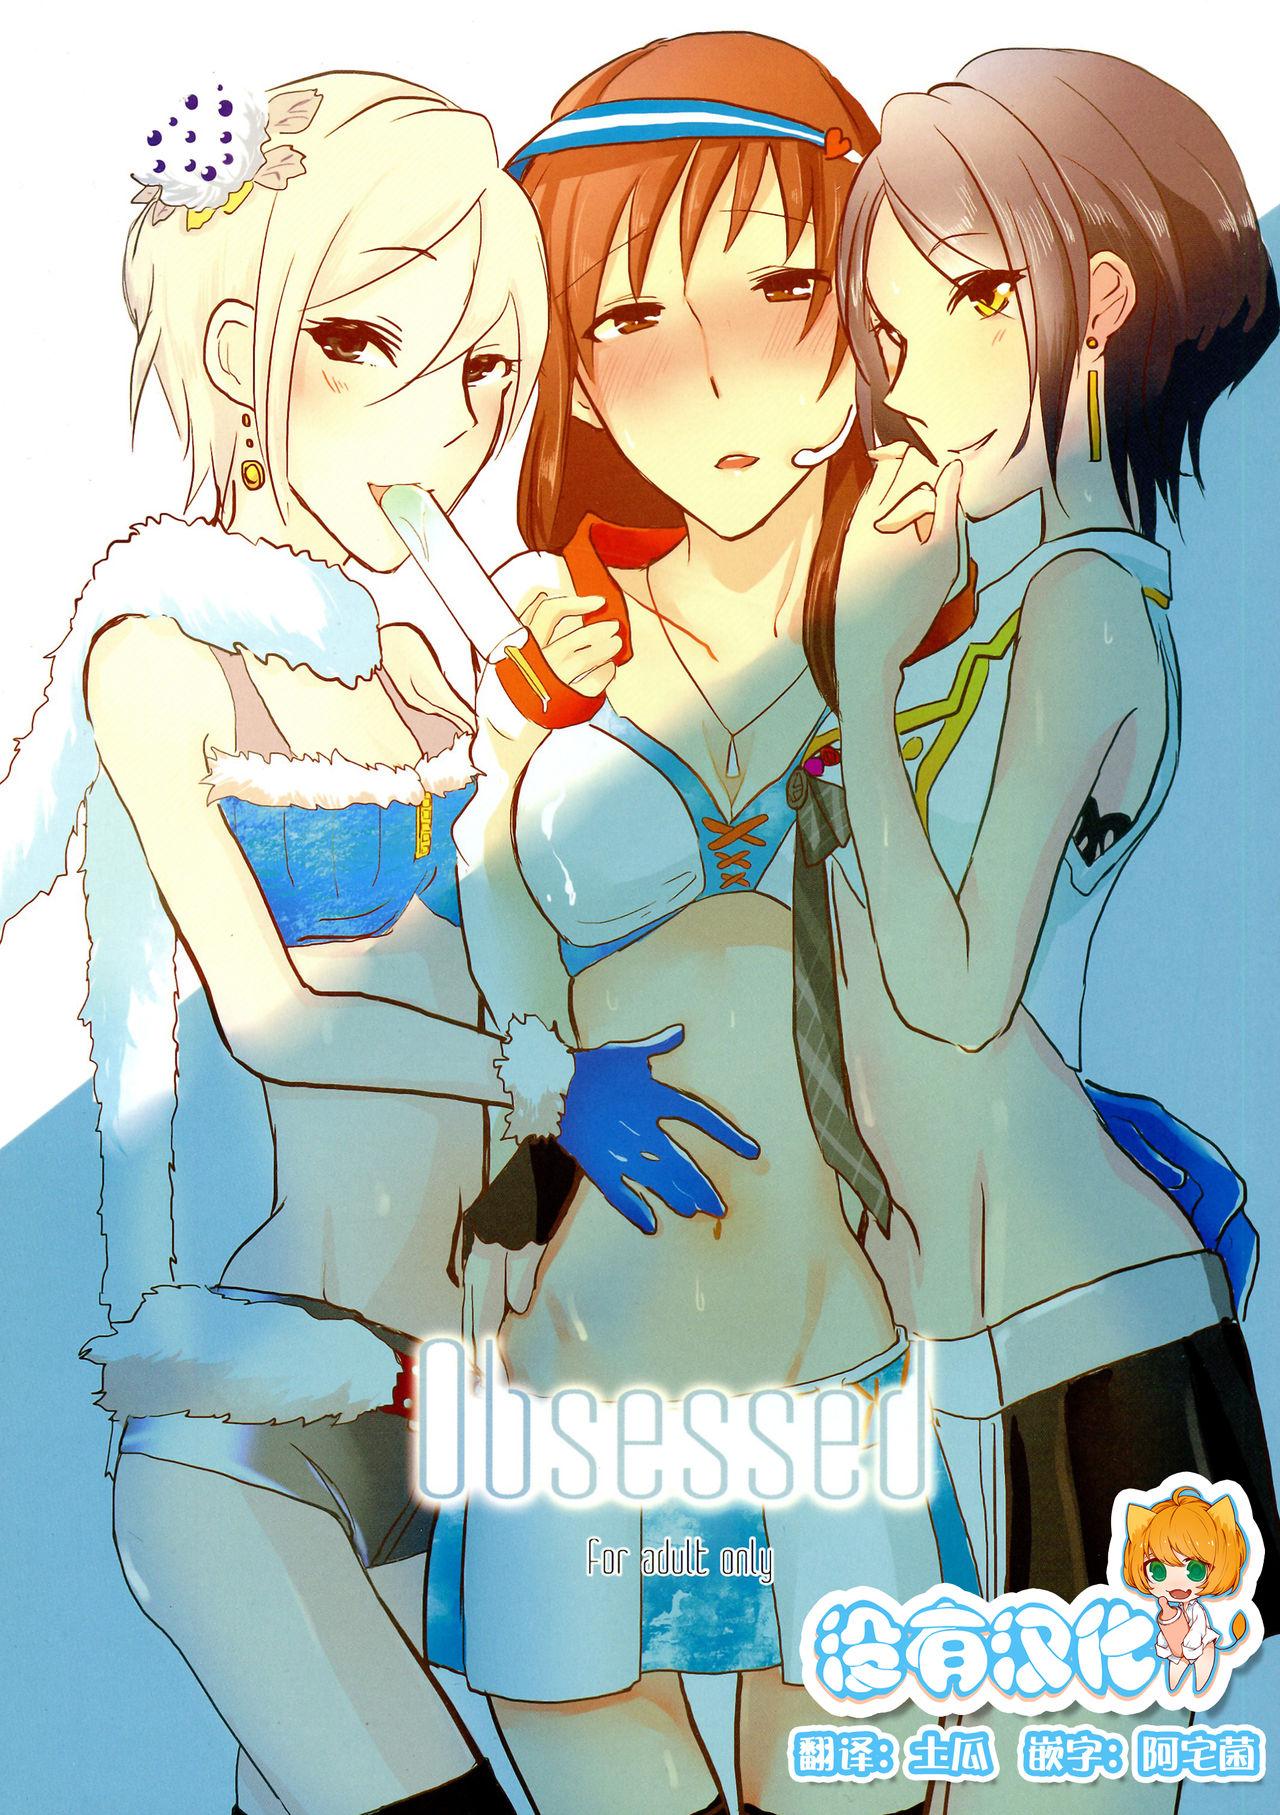 Fucked Hard obsessed - The idolmaster Skinny - Page 1